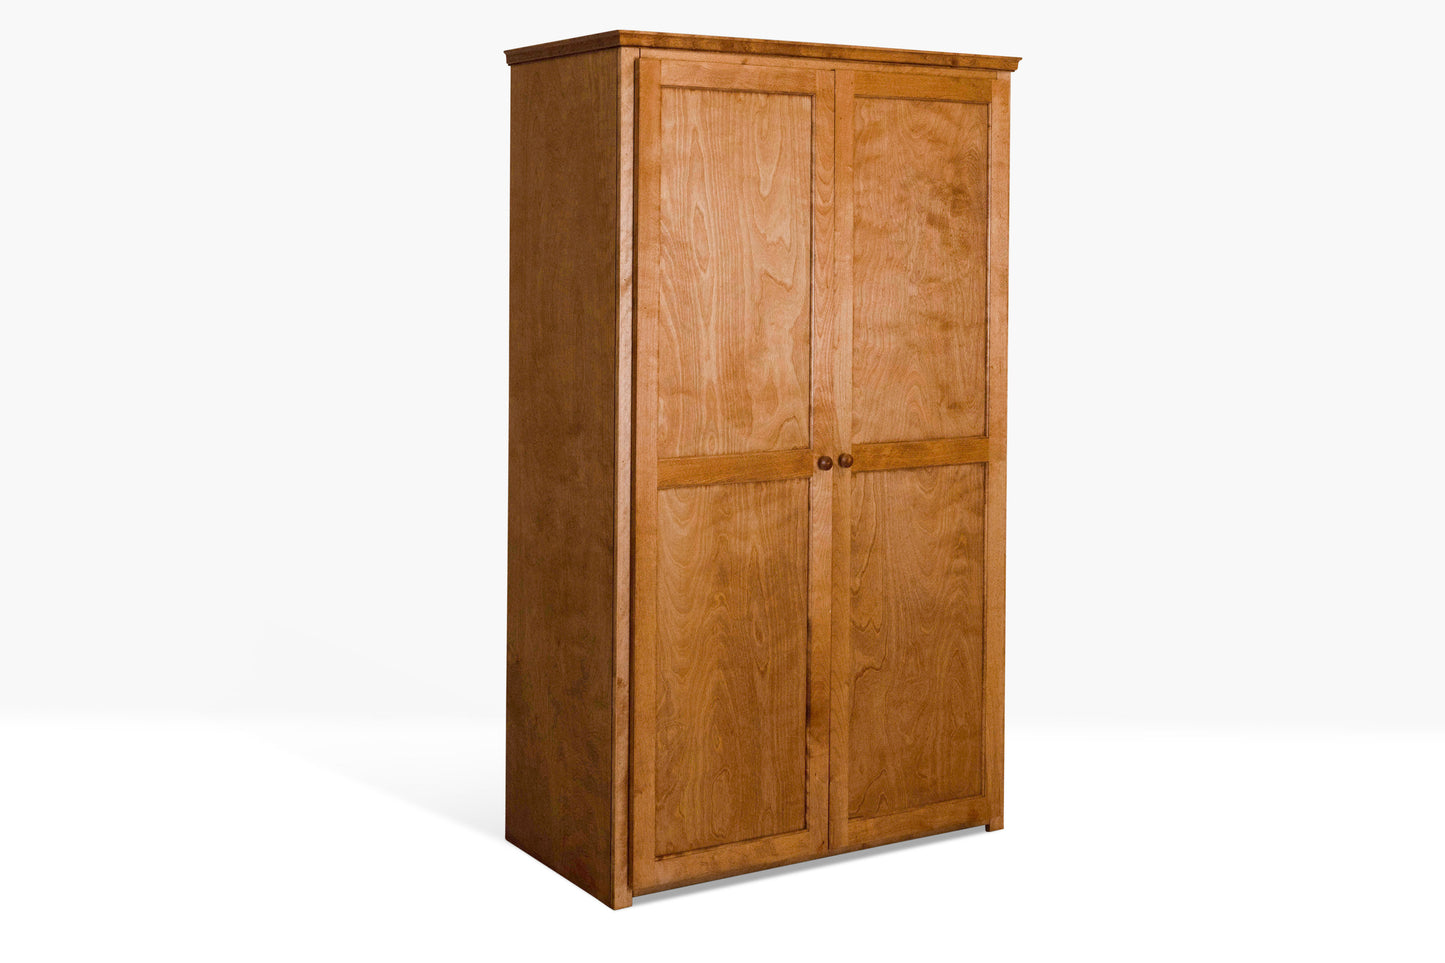 Berkshire Plymouth Pantry Cabinet shown from side angle. Features include crown moulding and adjustable shelves. Shown in Legacy Cherry finish.